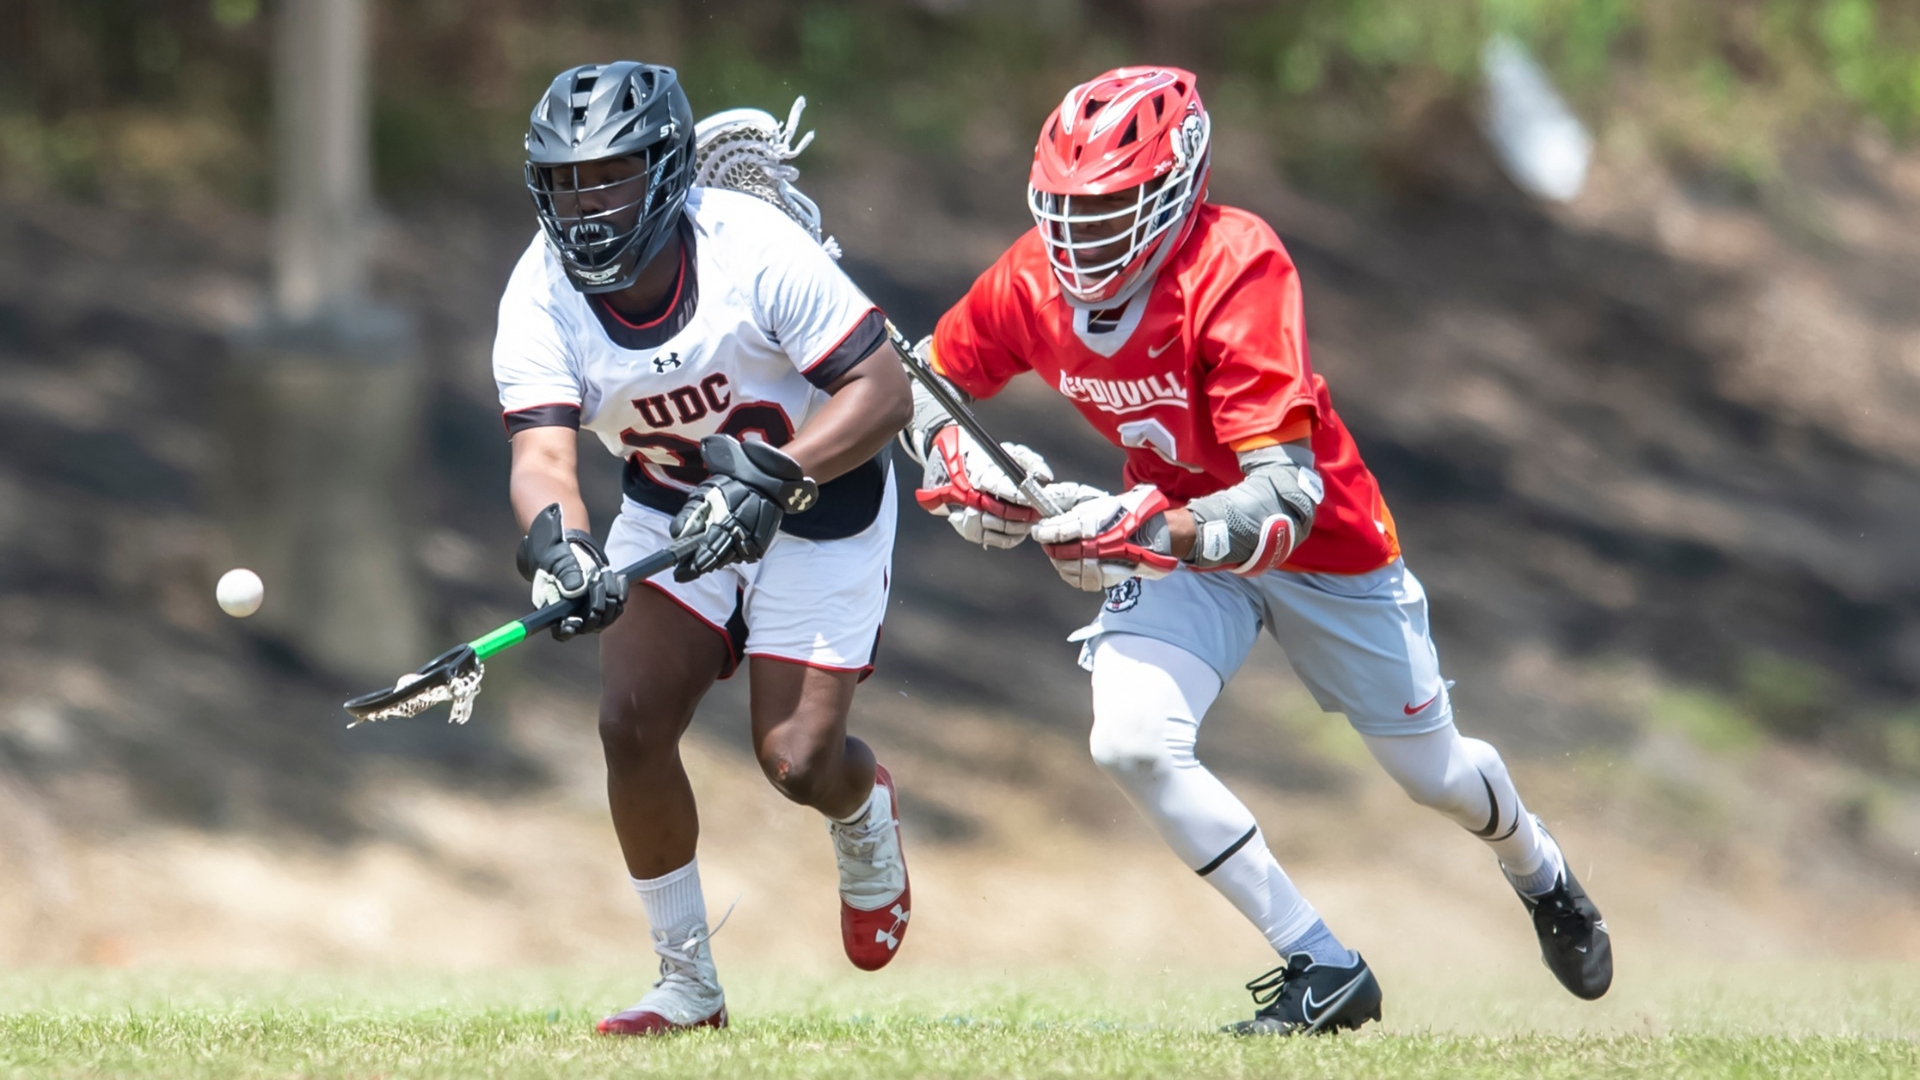 Lofton Jr. won 29-31 Face Offs while scooping a game-high 23 ground balls.